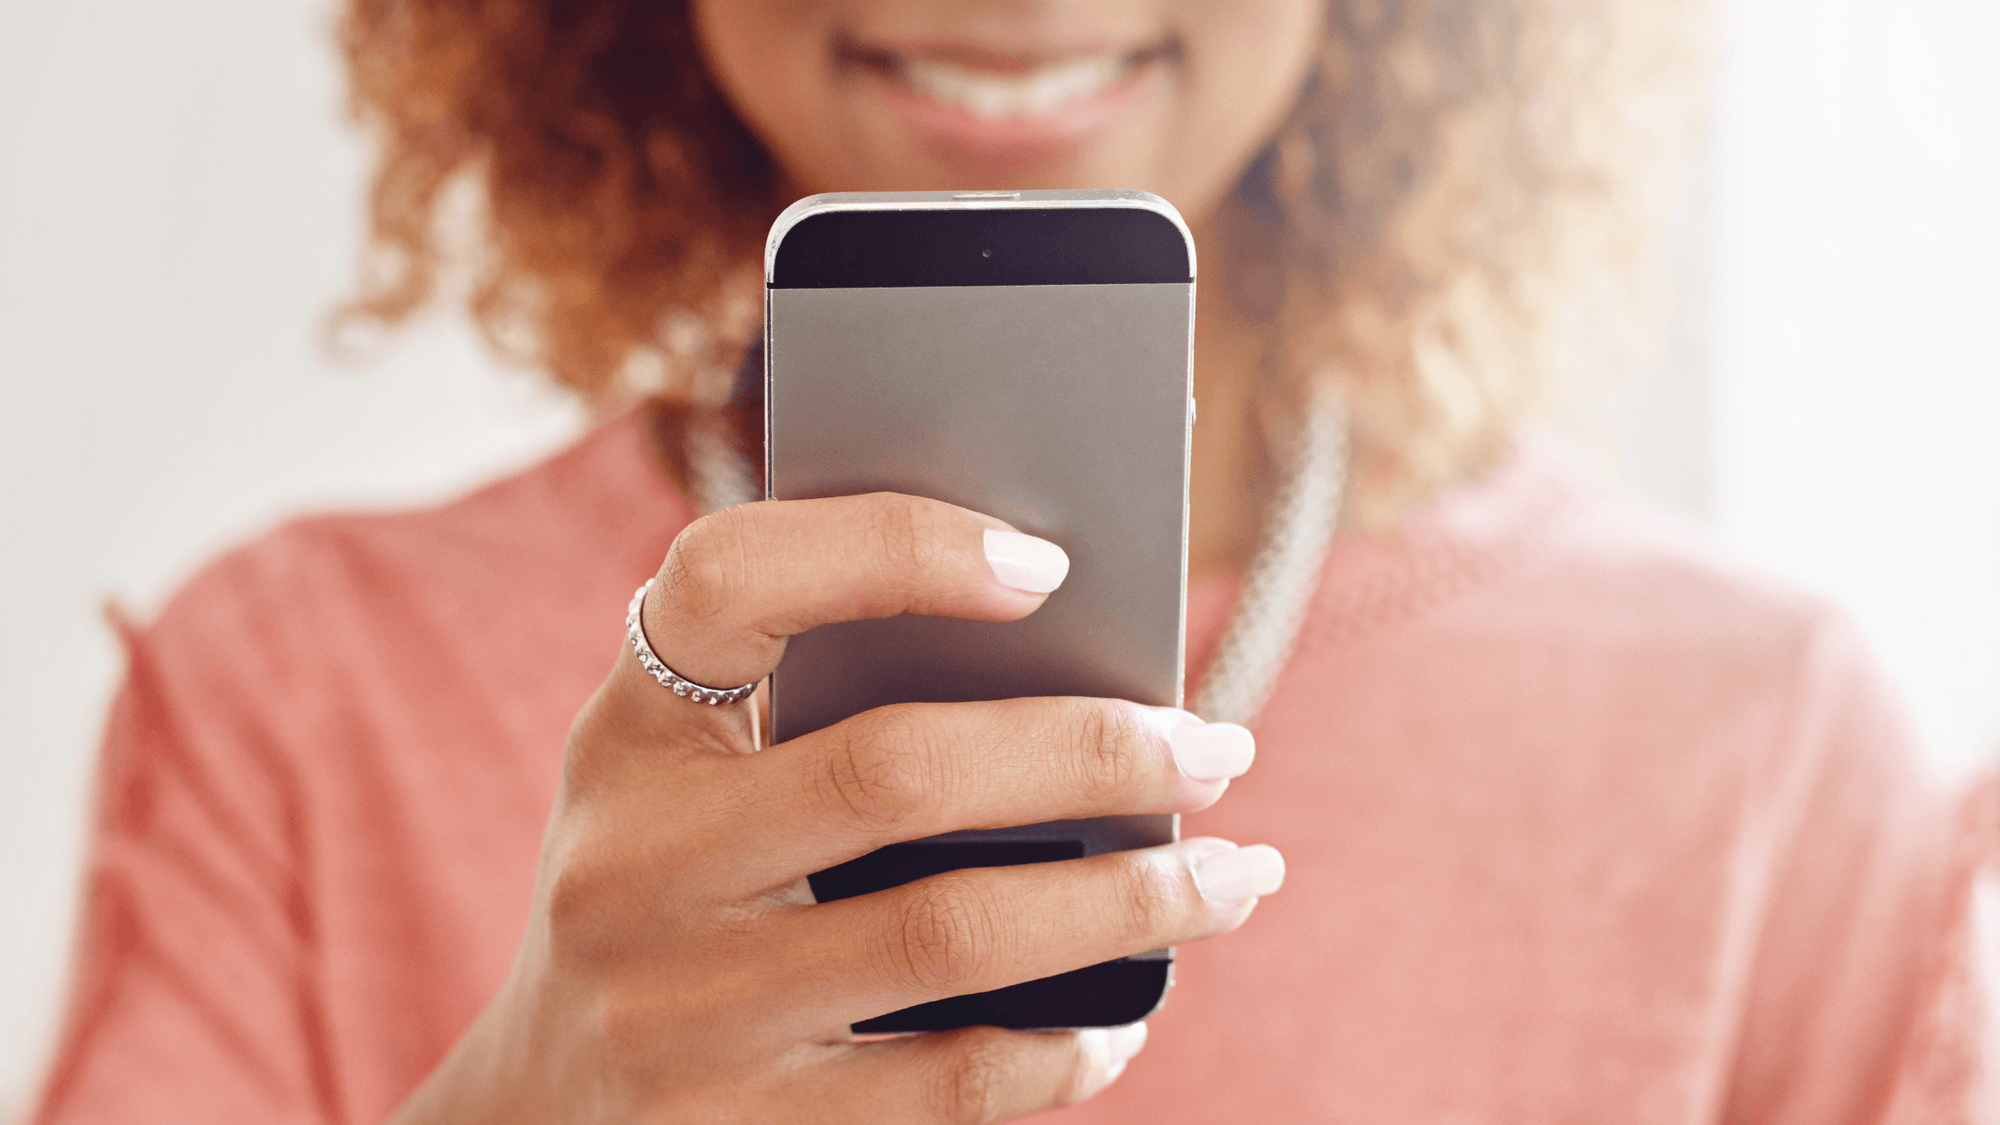 A woman with curly hair using a mobile phone.